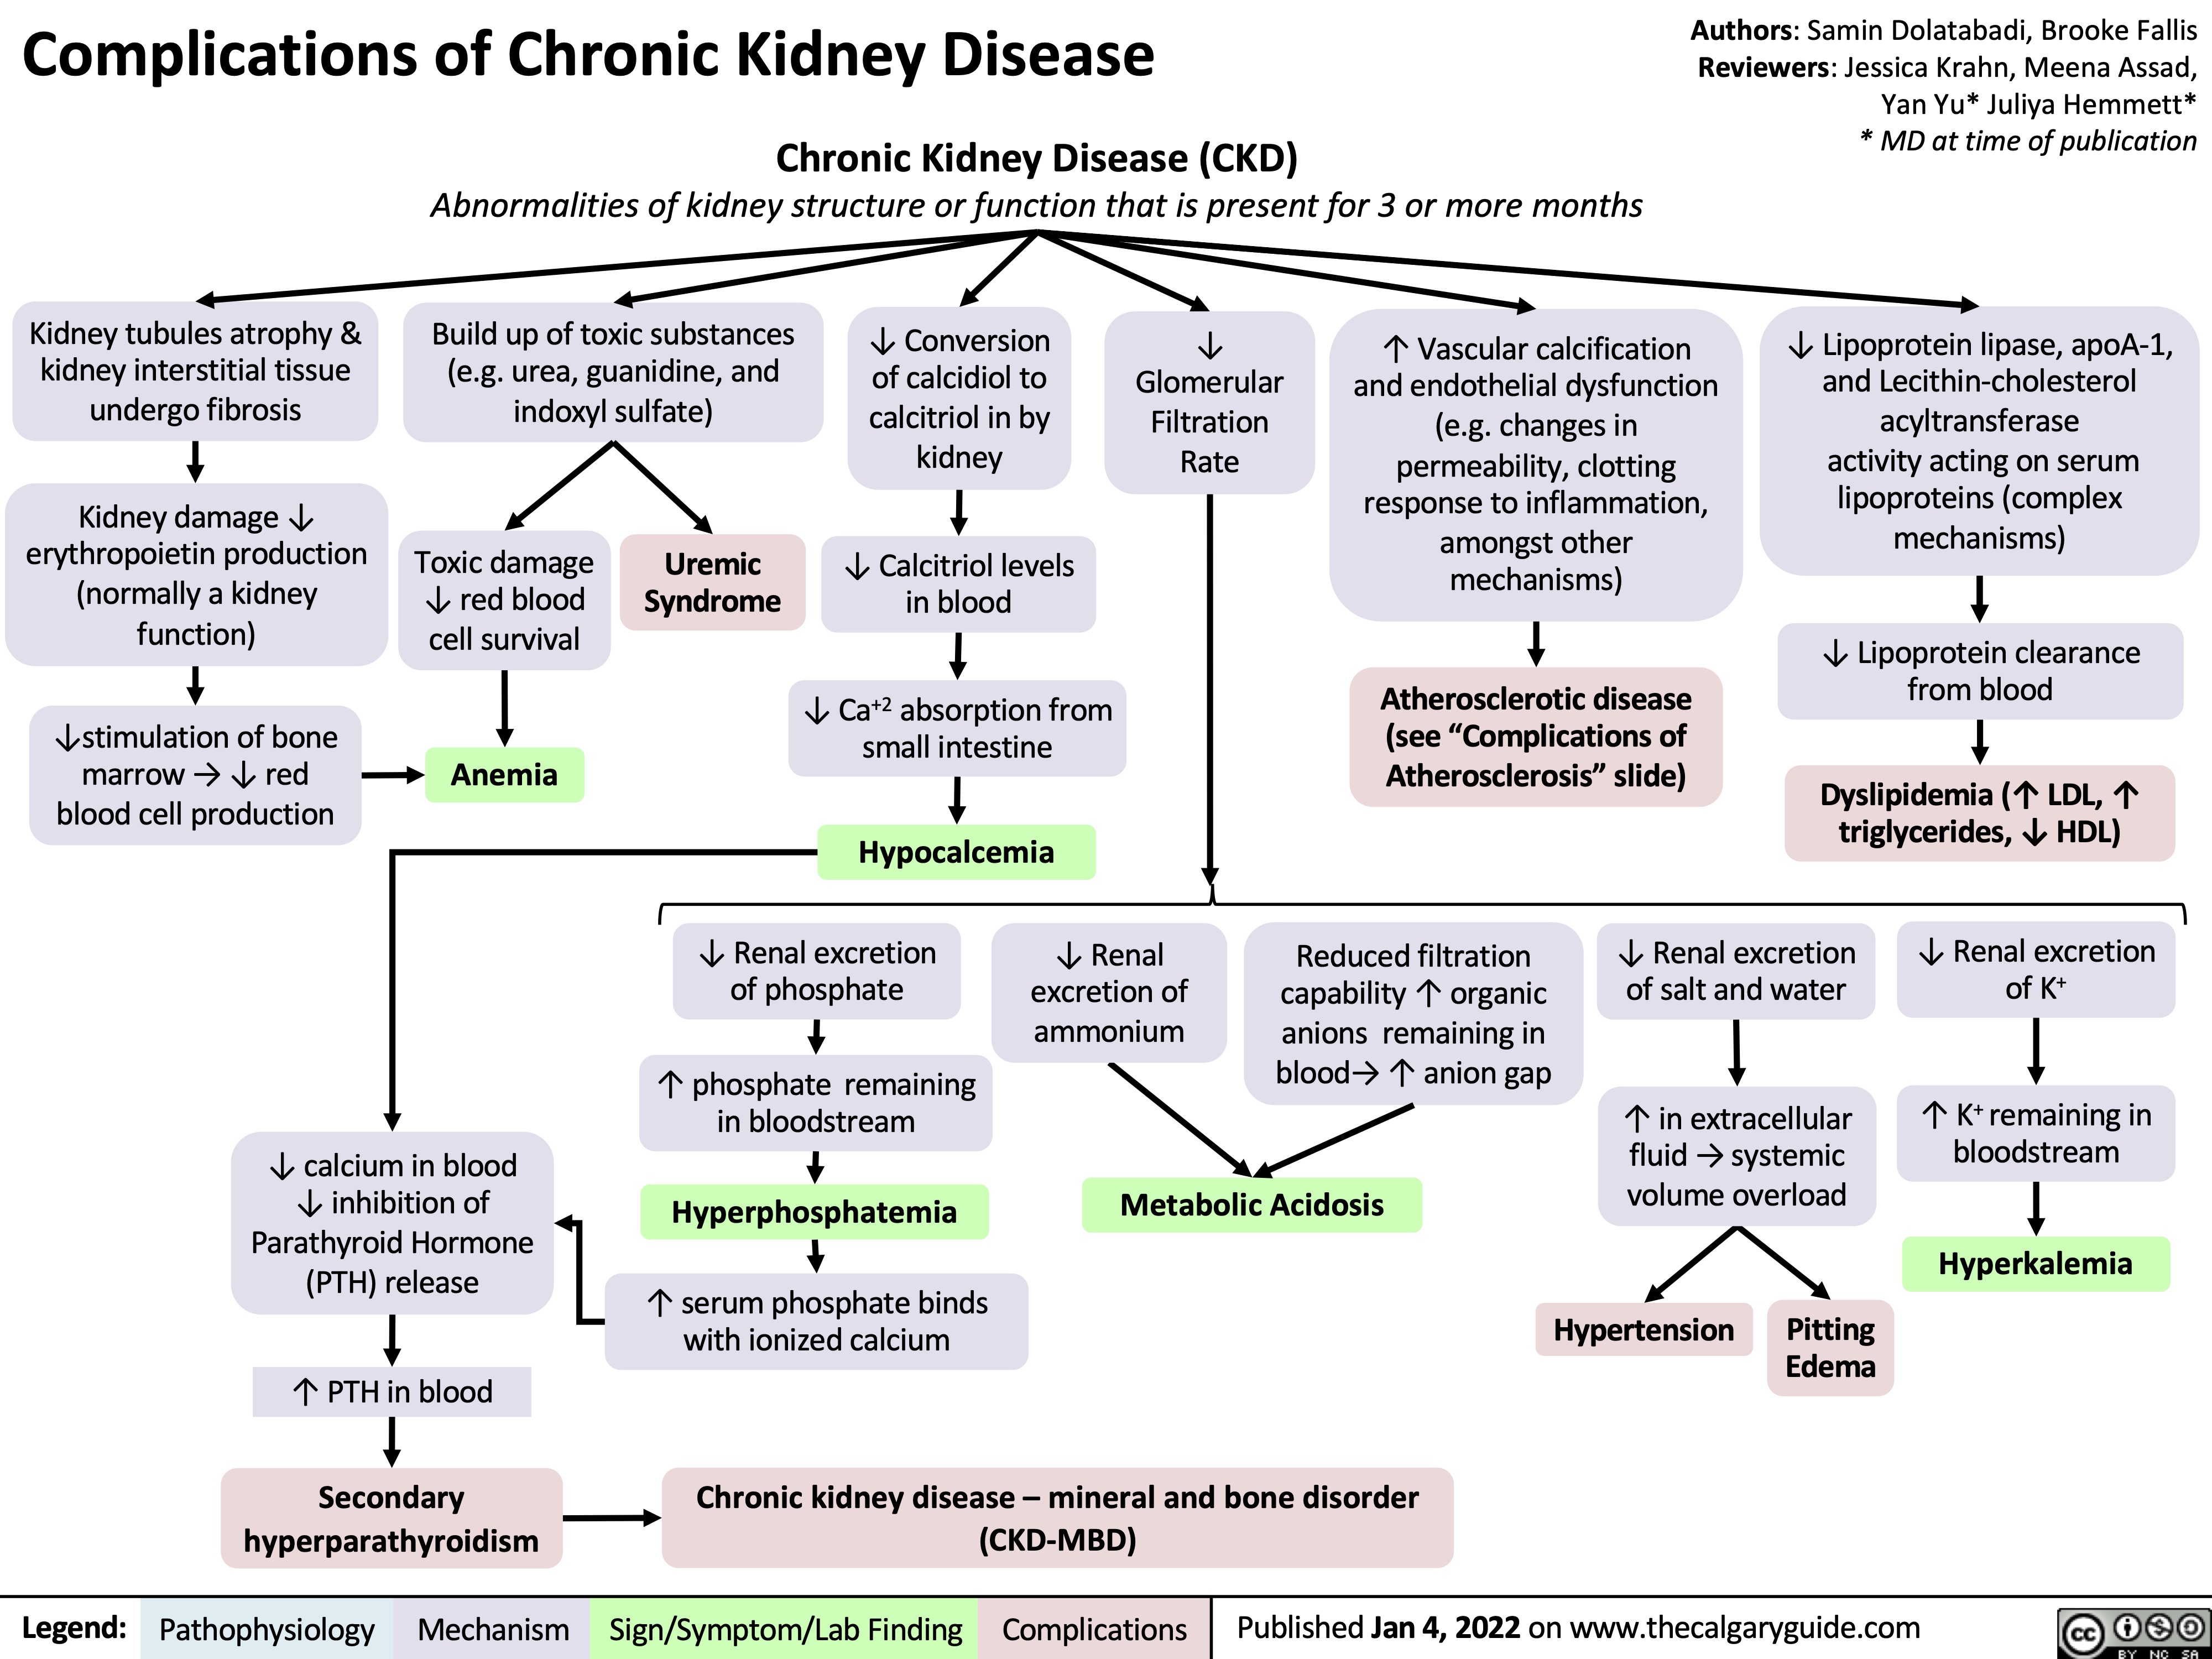 Complications of Chronic Kidney Disease Chronic Kidney Disease (CKD)
Authors: Samin Dolatabadi, Brooke Fallis Reviewers: Jessica Krahn, Meena Assad, Yan Yu* Juliya Hemmett* * MD at time of publication
Abnormalities of kidney structure or function that is present for 3 or more months
          Kidney tubules atrophy & kidney interstitial tissue undergo fibrosis
Kidney damage ↓ erythropoietin production (normally a kidney function)
↓stimulation of bone marrow → ↓ red blood cell production
Build up of toxic substances (e.g. urea, guanidine, and indoxyl sulfate)
↓ Conversion of calcidiol to calcitriol in by kidney
↓ Calcitriol levels in blood
↓ Ca+2 absorption from small intestine
Hypocalcemia
↓ Glomerular Filtration Rate
↑ Vascular calcification and endothelial dysfunction (e.g. changes in permeability, clotting response to inflammation, amongst other mechanisms)
Atherosclerotic disease (see “Complications of Atherosclerosis” slide)
↓ Lipoprotein lipase, apoA-1, and Lecithin-cholesterol acyltransferase
activity acting on serum lipoproteins (complex mechanisms)
↓ Lipoprotein clearance from blood
Dyslipidemia (↑ LDL, ↑ triglycerides, ↓ HDL)
       Toxic damage ↓ red blood cell survival
Anemia
Uremic Syndrome
              ↓ Renal excretion of phosphate
↑ phosphate remaining in bloodstream
Hyperphosphatemia
↑ serum phosphate binds with ionized calcium
↓ Renal excretion of K+
↑ K+ remaining in bloodstream
Hyperkalemia Edema
↓ Renal excretion of ammonium
Reduced filtration capability ↑ organic anions remaining in blood→ ↑ anion gap
↓ Renal excretion of salt and water
↑ in extracellular fluid → systemic volume overload
      ↓ calcium in blood ↓ inhibition of Parathyroid Hormone (PTH) release
↑ PTH in blood
Secondary hyperparathyroidism
Metabolic Acidosis
       Hypertension
Pitting
   Chronic kidney disease – mineral and bone disorder (CKD-MBD)
 Legend:
 Pathophysiology
 Mechanism
Sign/Symptom/Lab Finding
 Complications
Published Jan 4, 2022 on www.thecalgaryguide.com
   